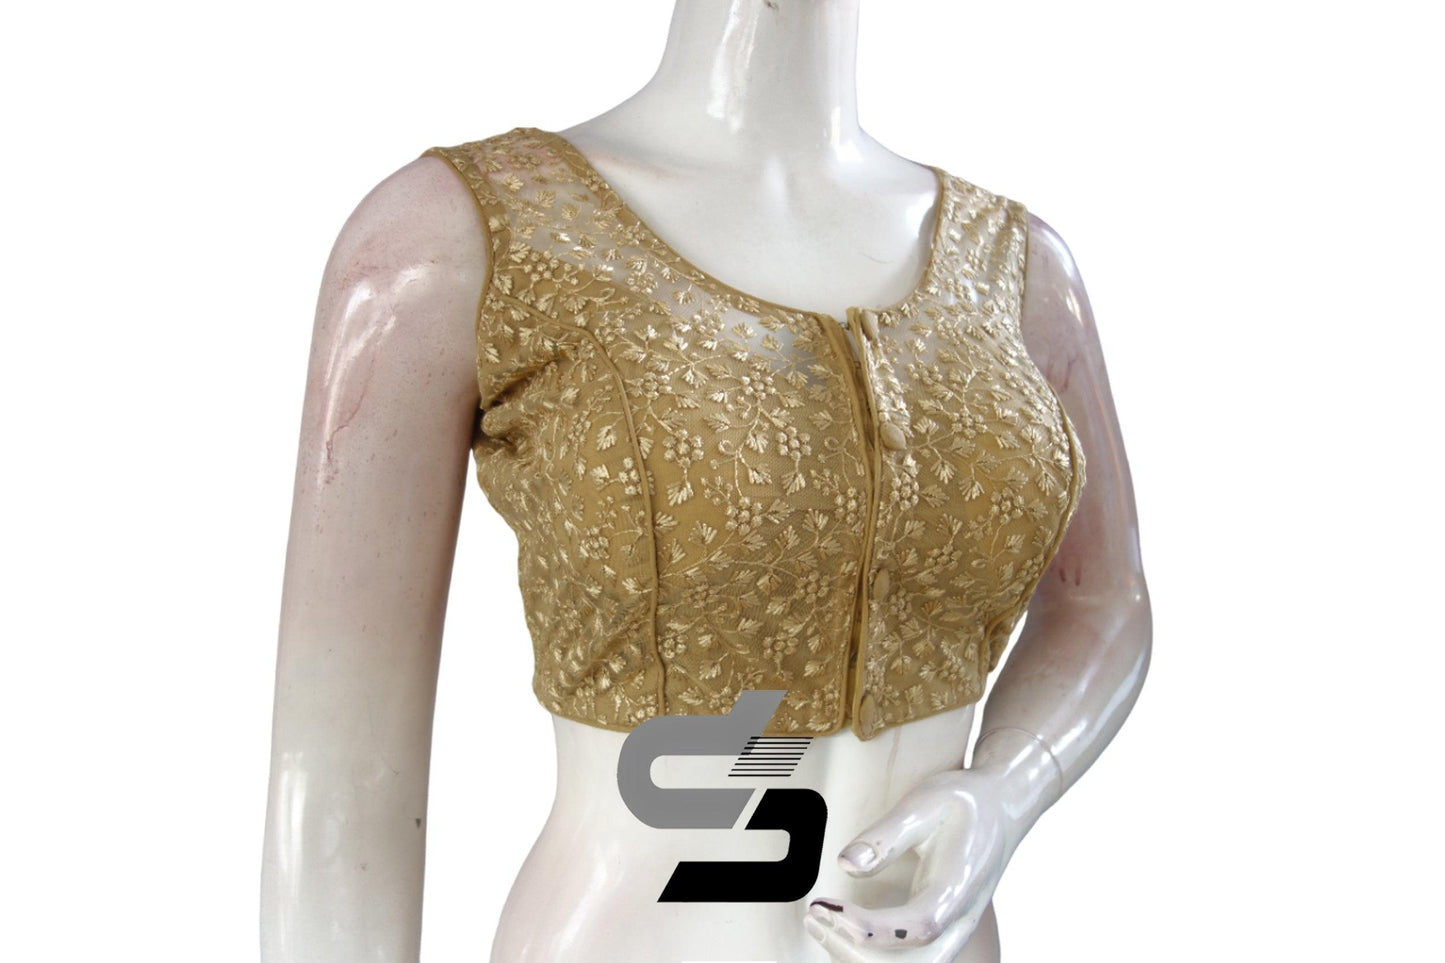 Gold Color Netted Embroidery Designer Readymade Blouse - D3blouses